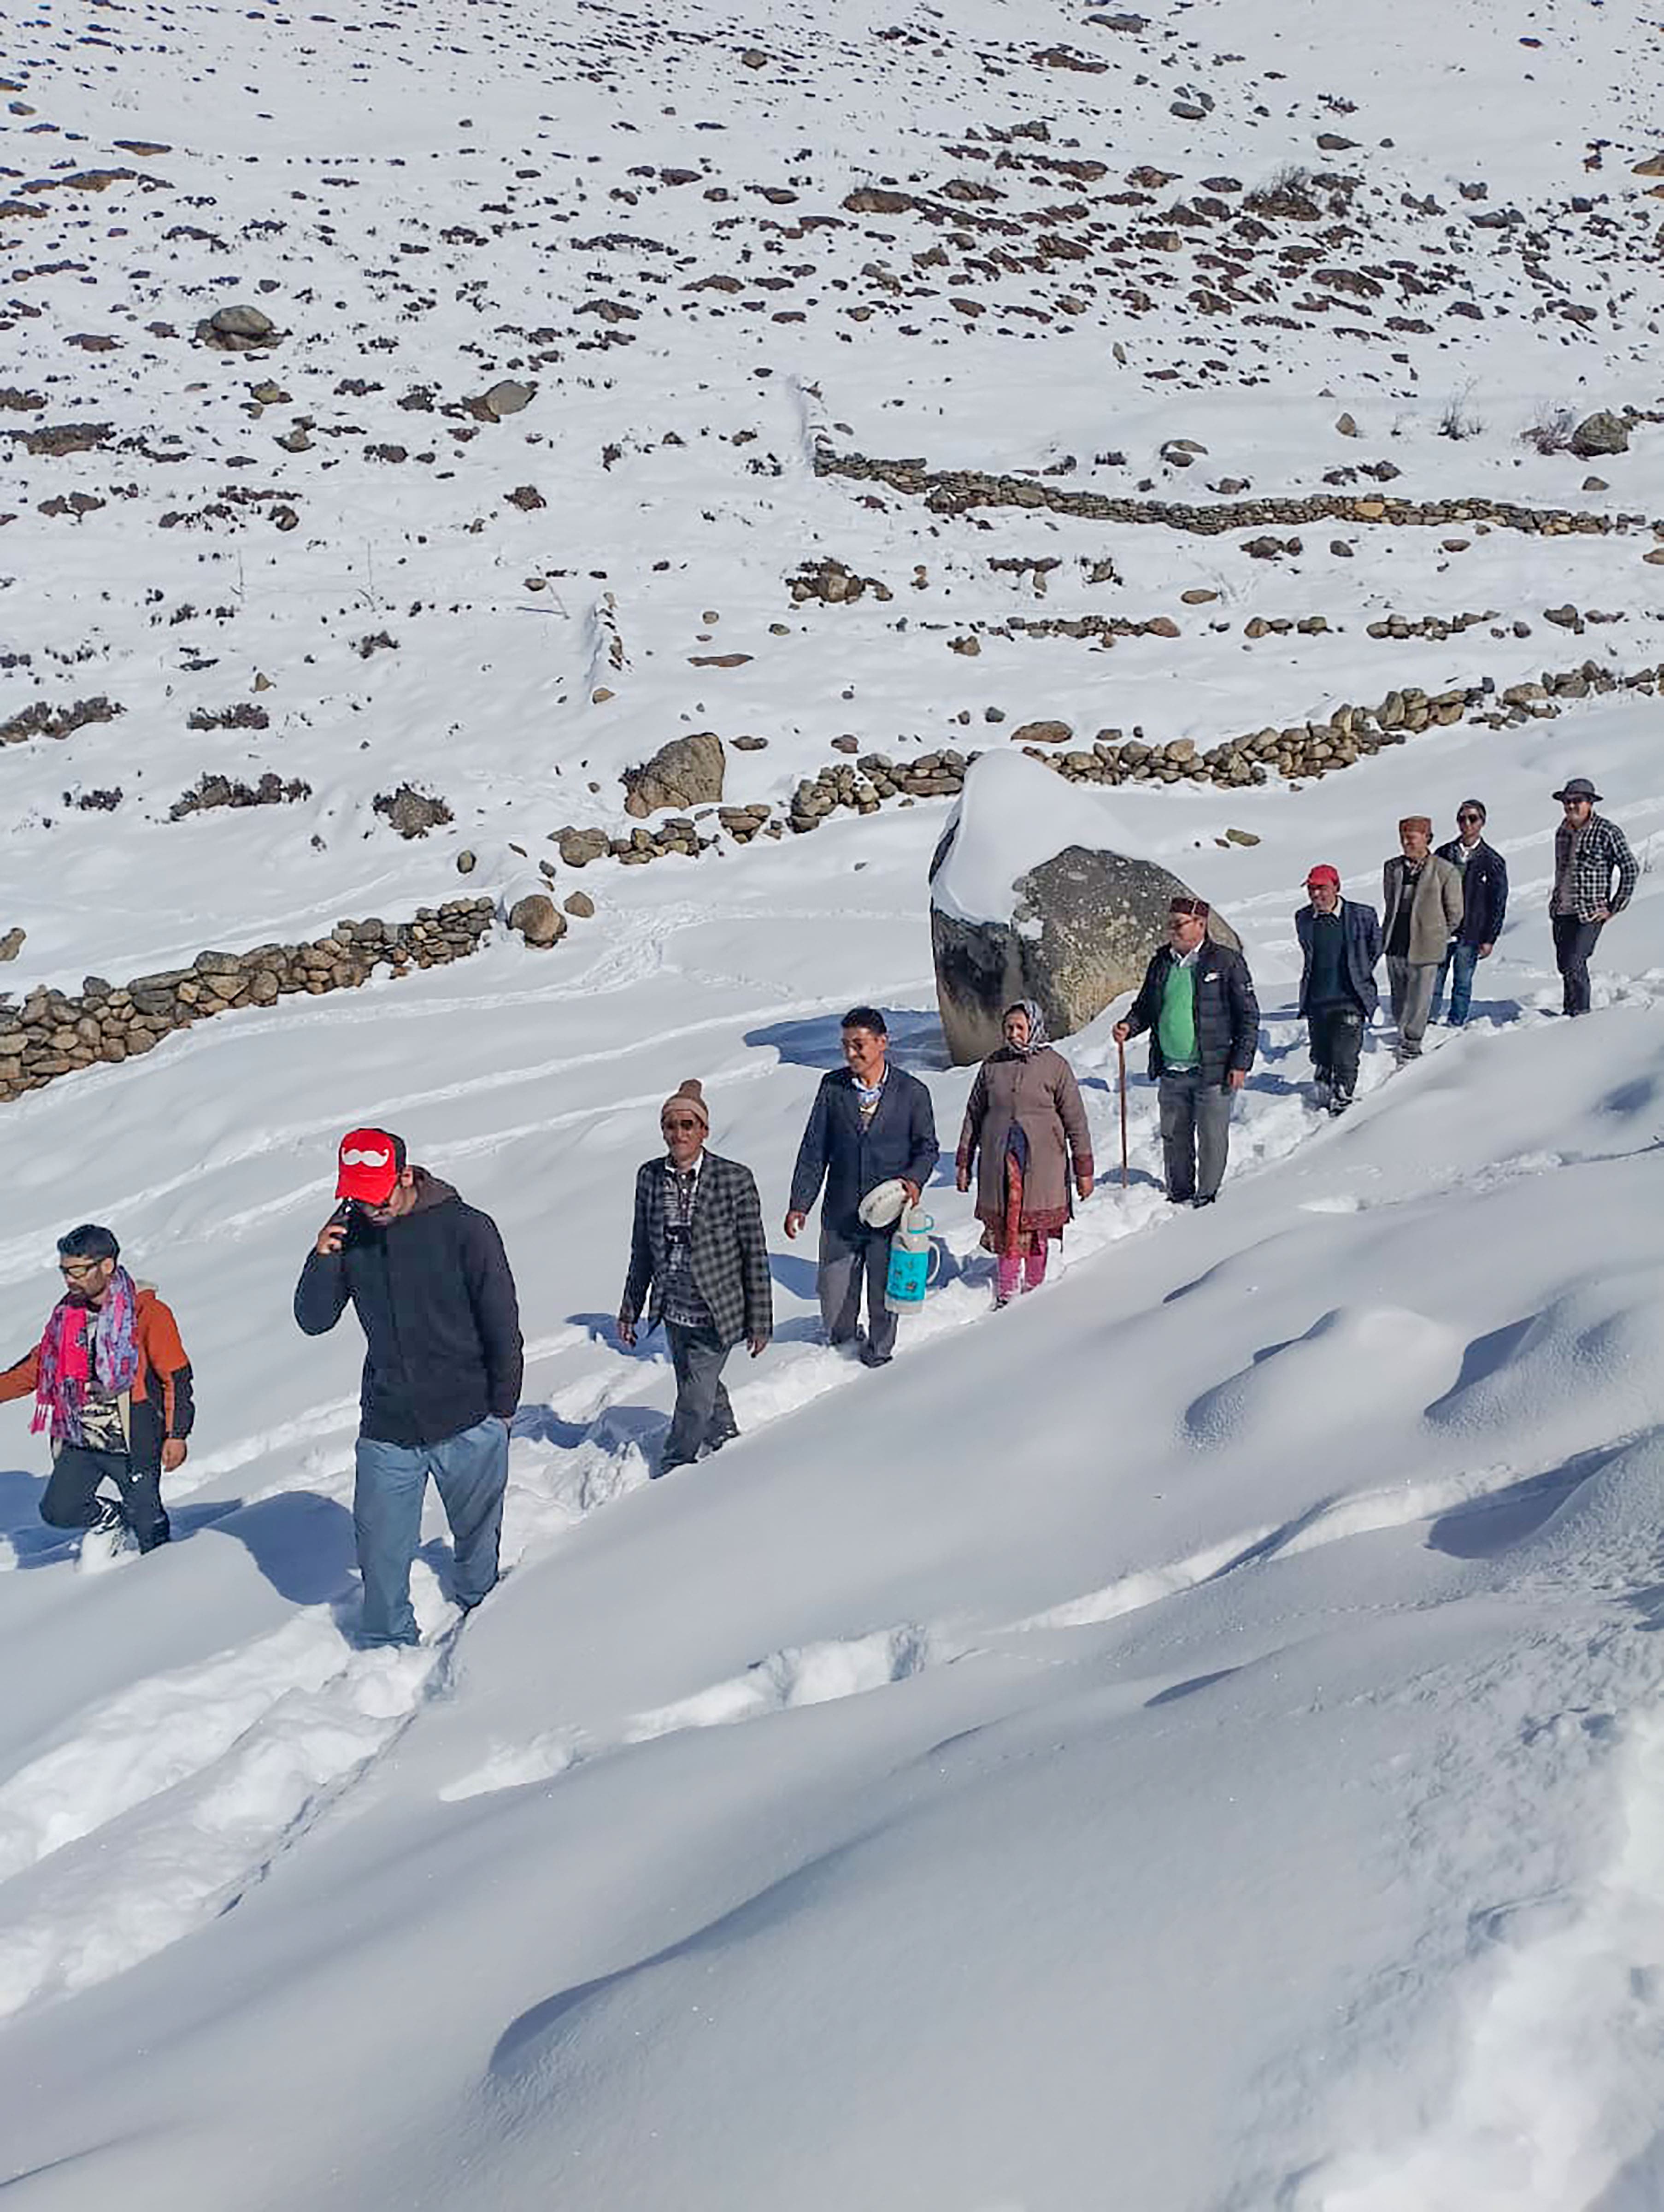 Himachal Assembly Elections 2022: Electors visit polling booth Bharmour Assembly constituency in snow clad way to cast vote